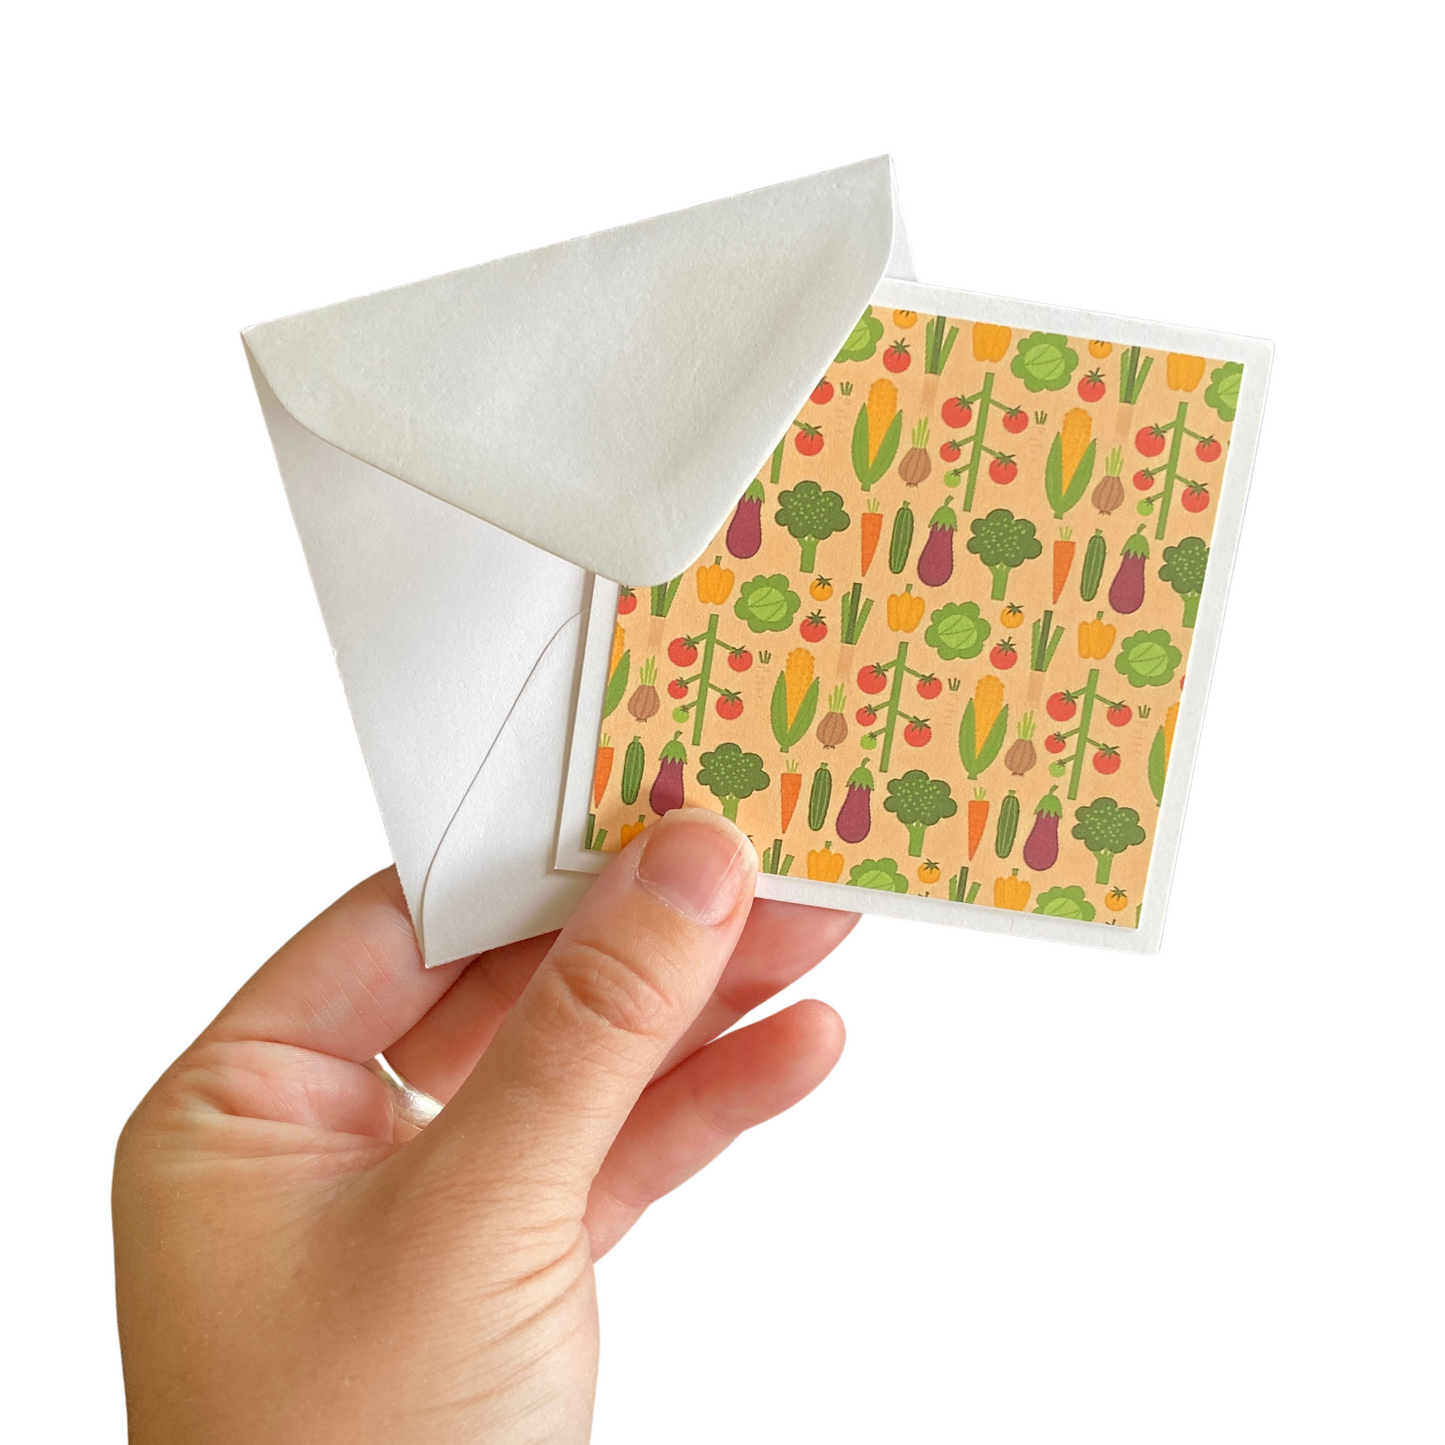 3x3 Grow Your Own Note Cards